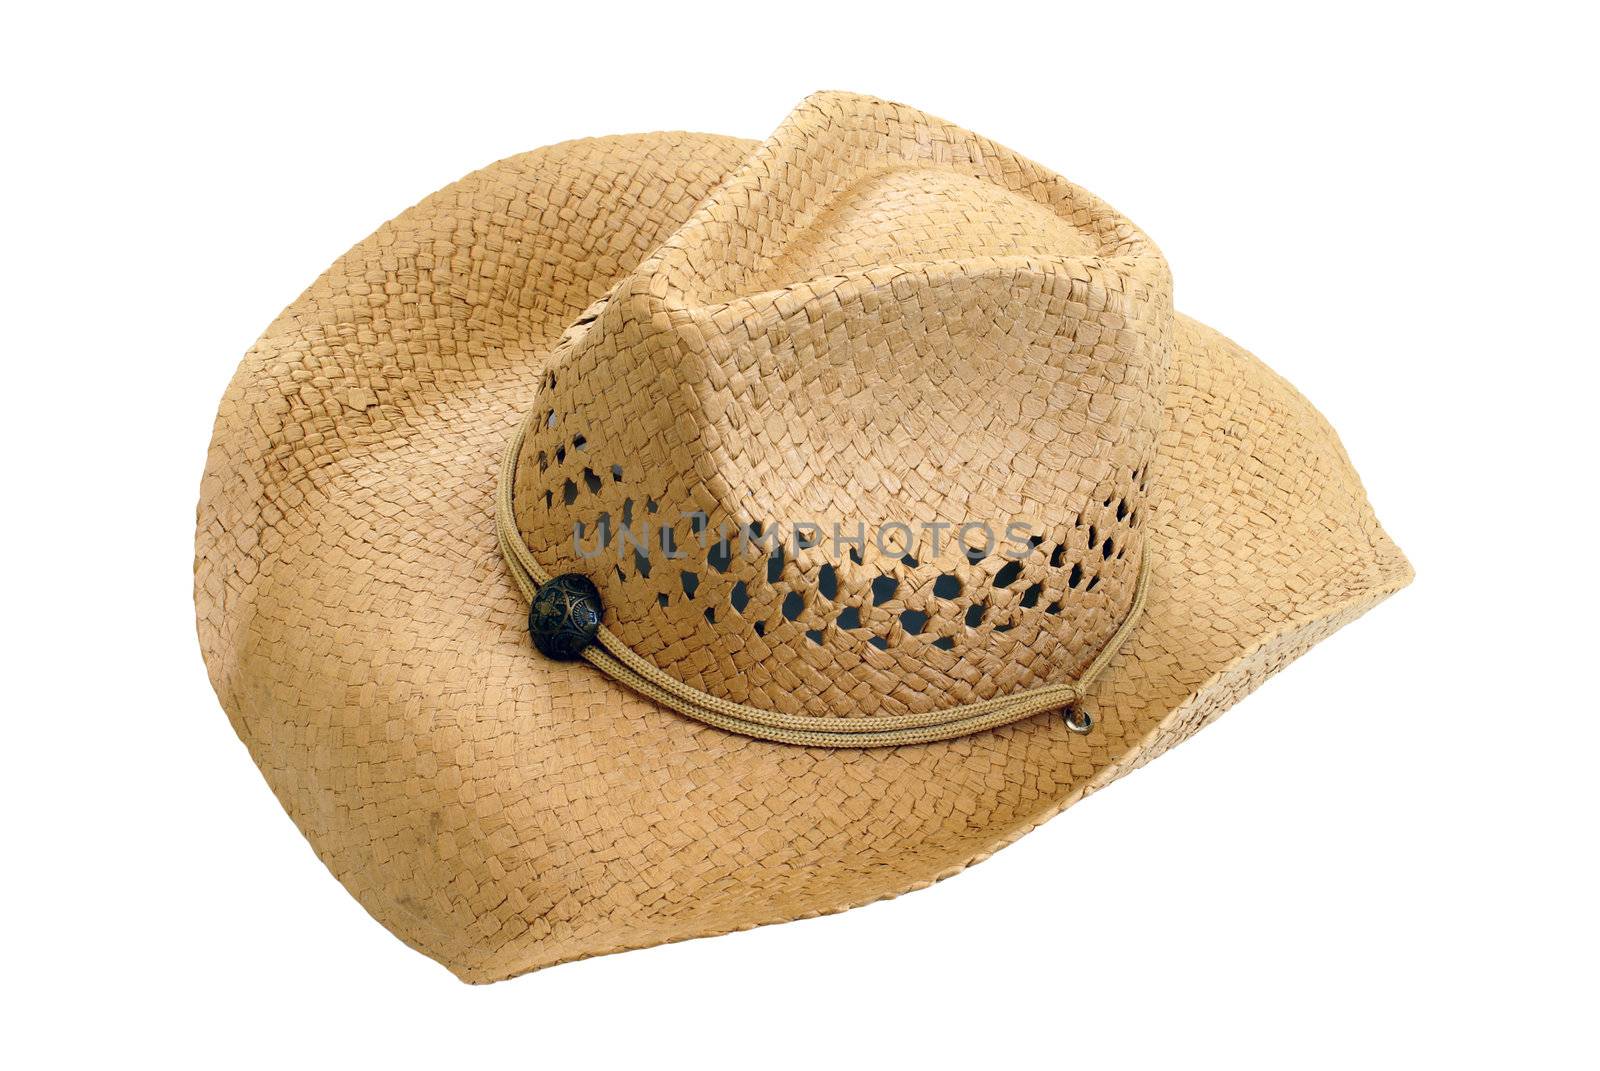 An isolated straw hat on white background.